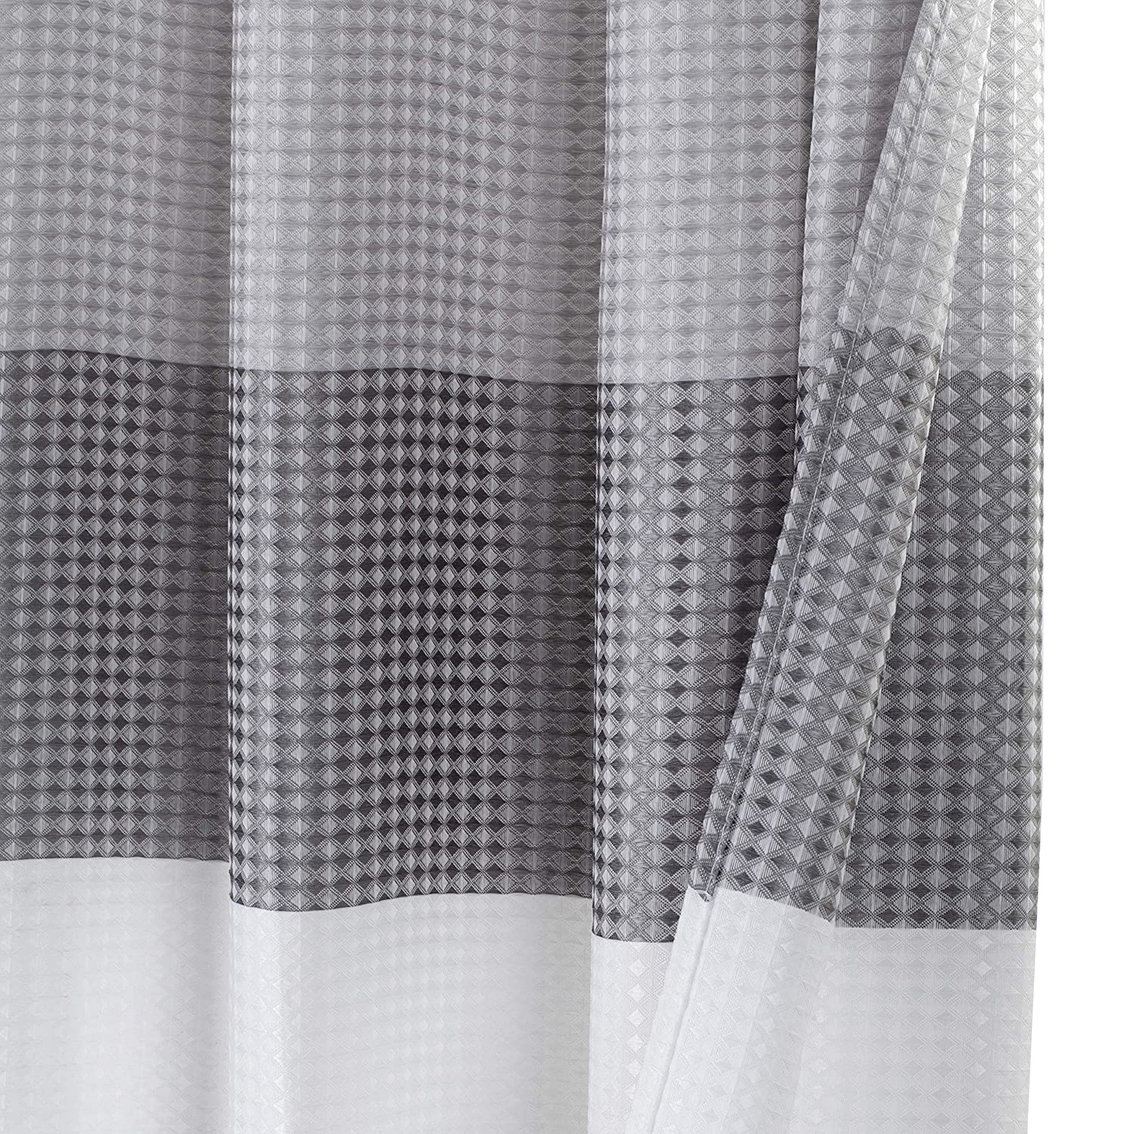 Dainty Home Ombre Waffle Shower Curtain 70 x 72 - Image 3 of 7